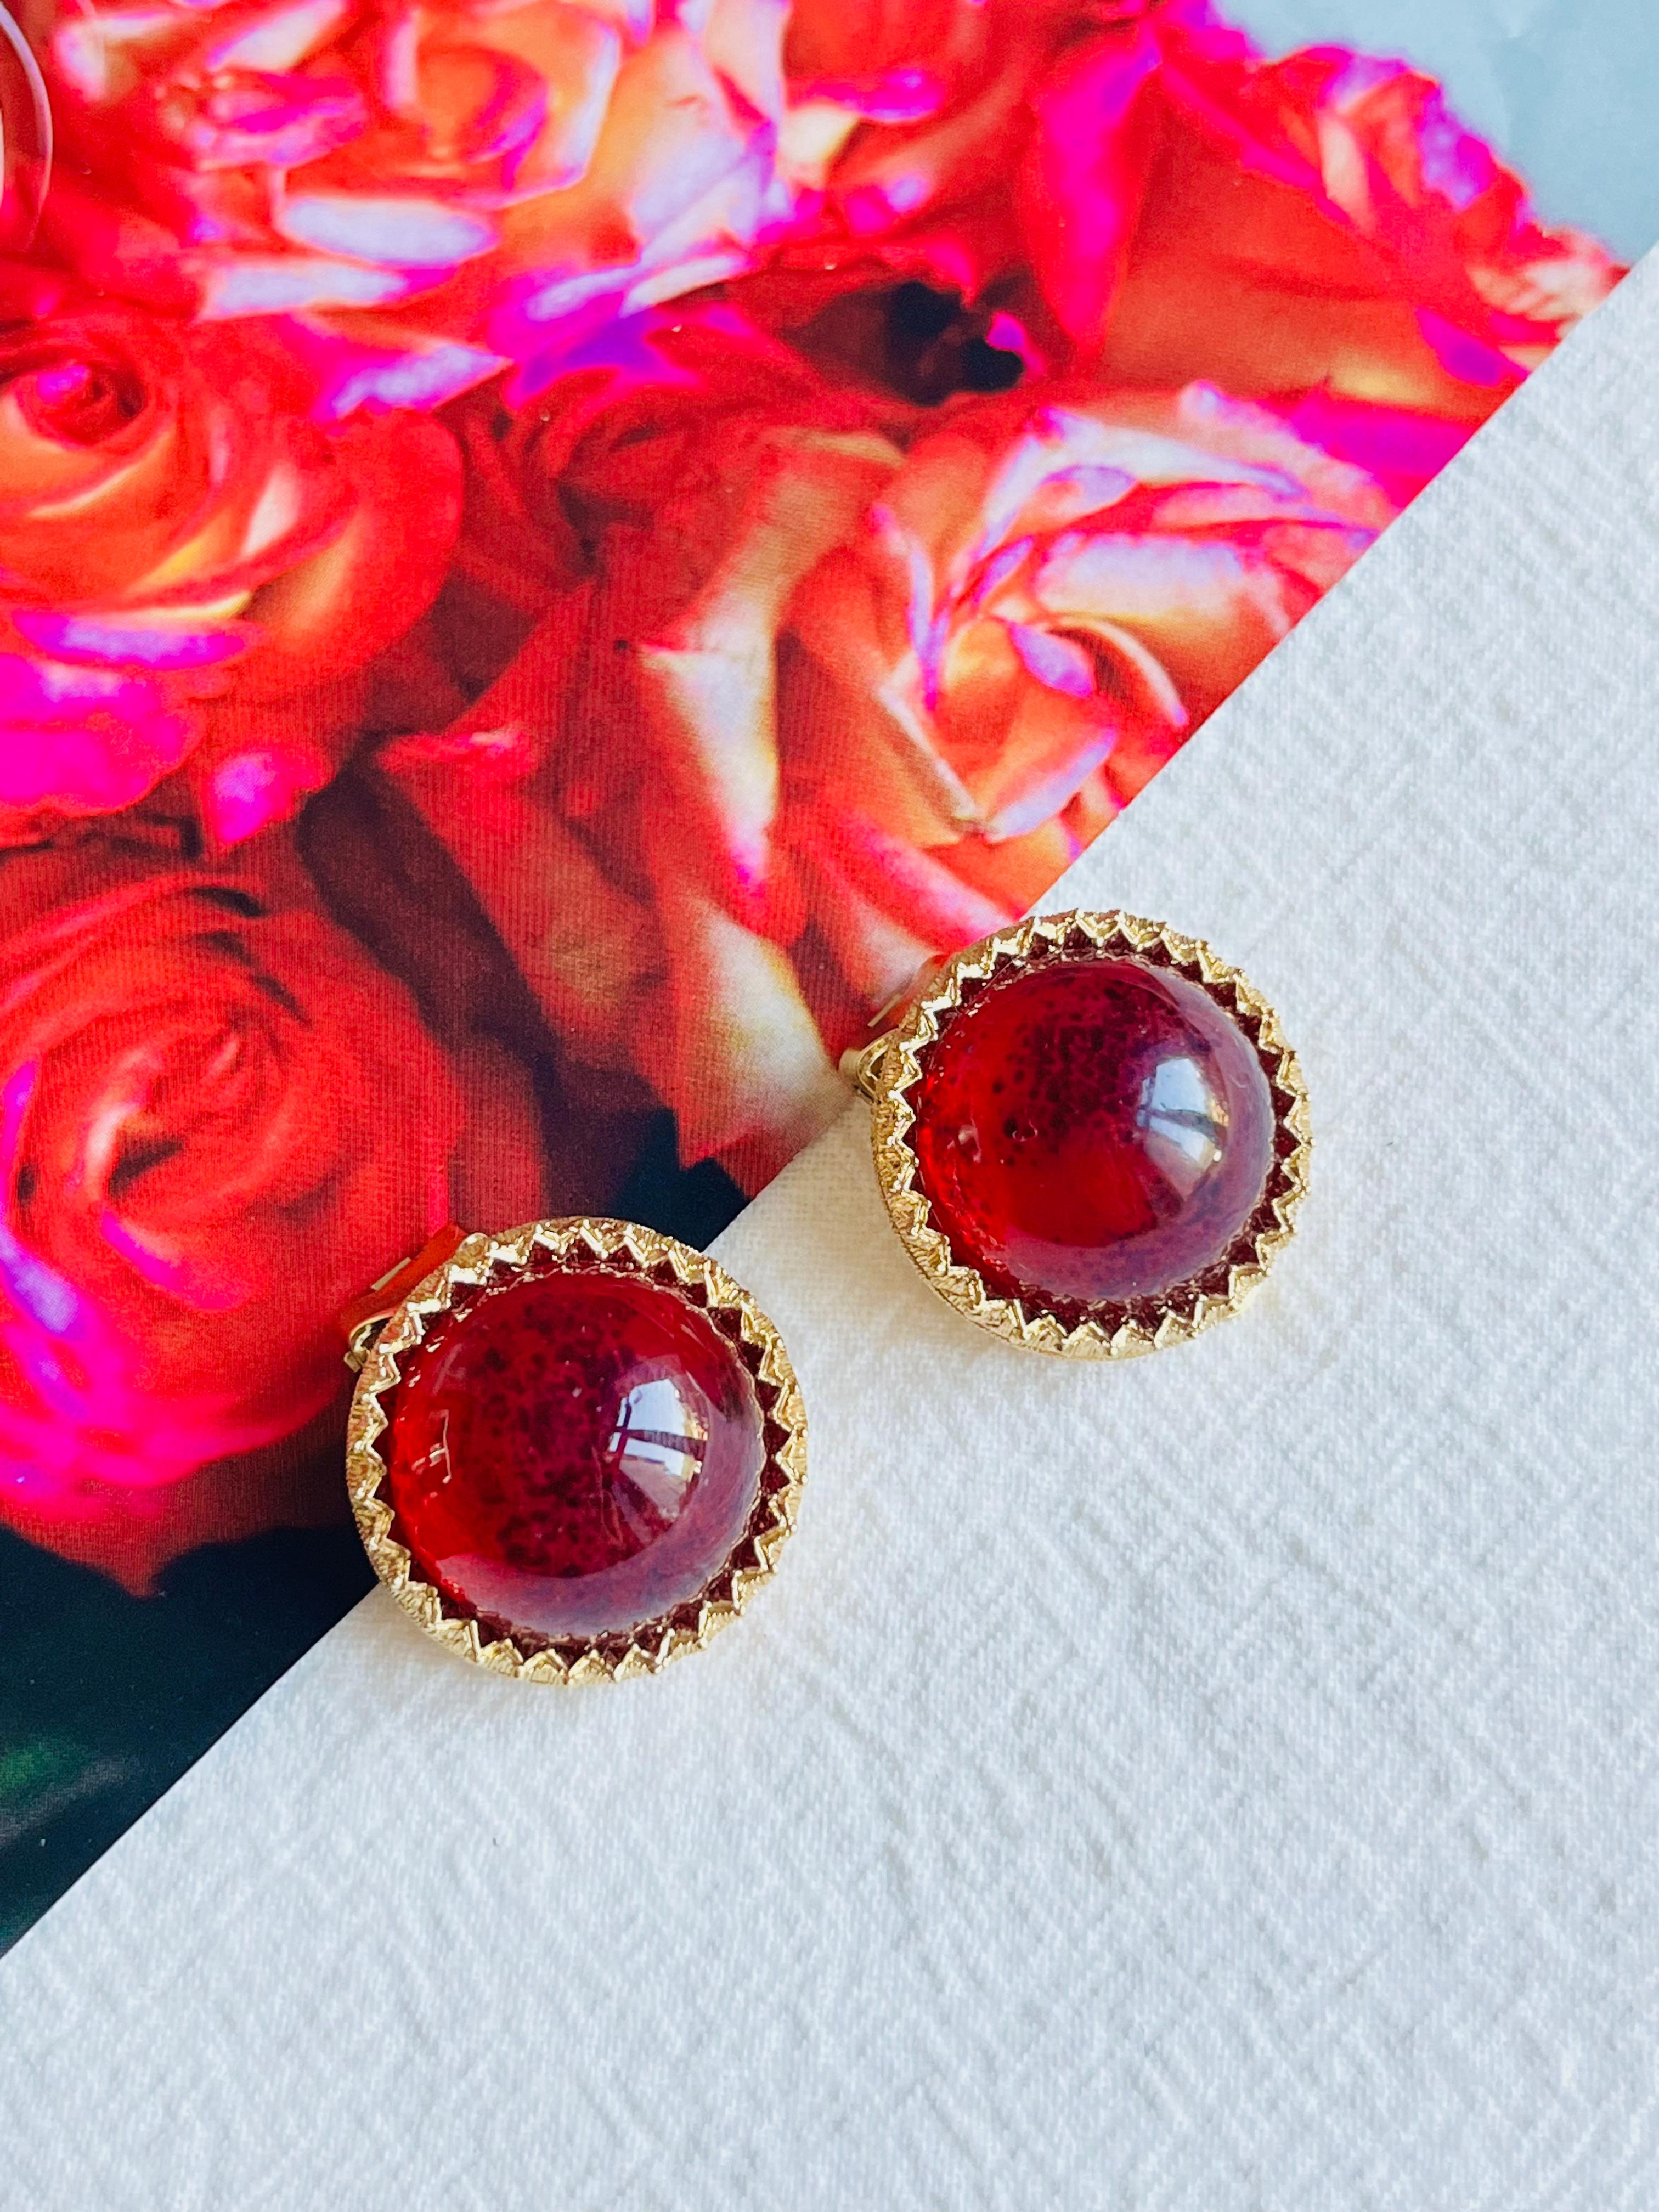 Very excellent condition. Vintage and rare to find. 

Not any colour loss or scratches. 

A very beautiful pair of clip on earrings by Chr. DIOR, signed at the back.

Size: 2.2*2.2 cm.

Weight: 9.0 g/each.

_ _ _

Great for everyday wear. Come with